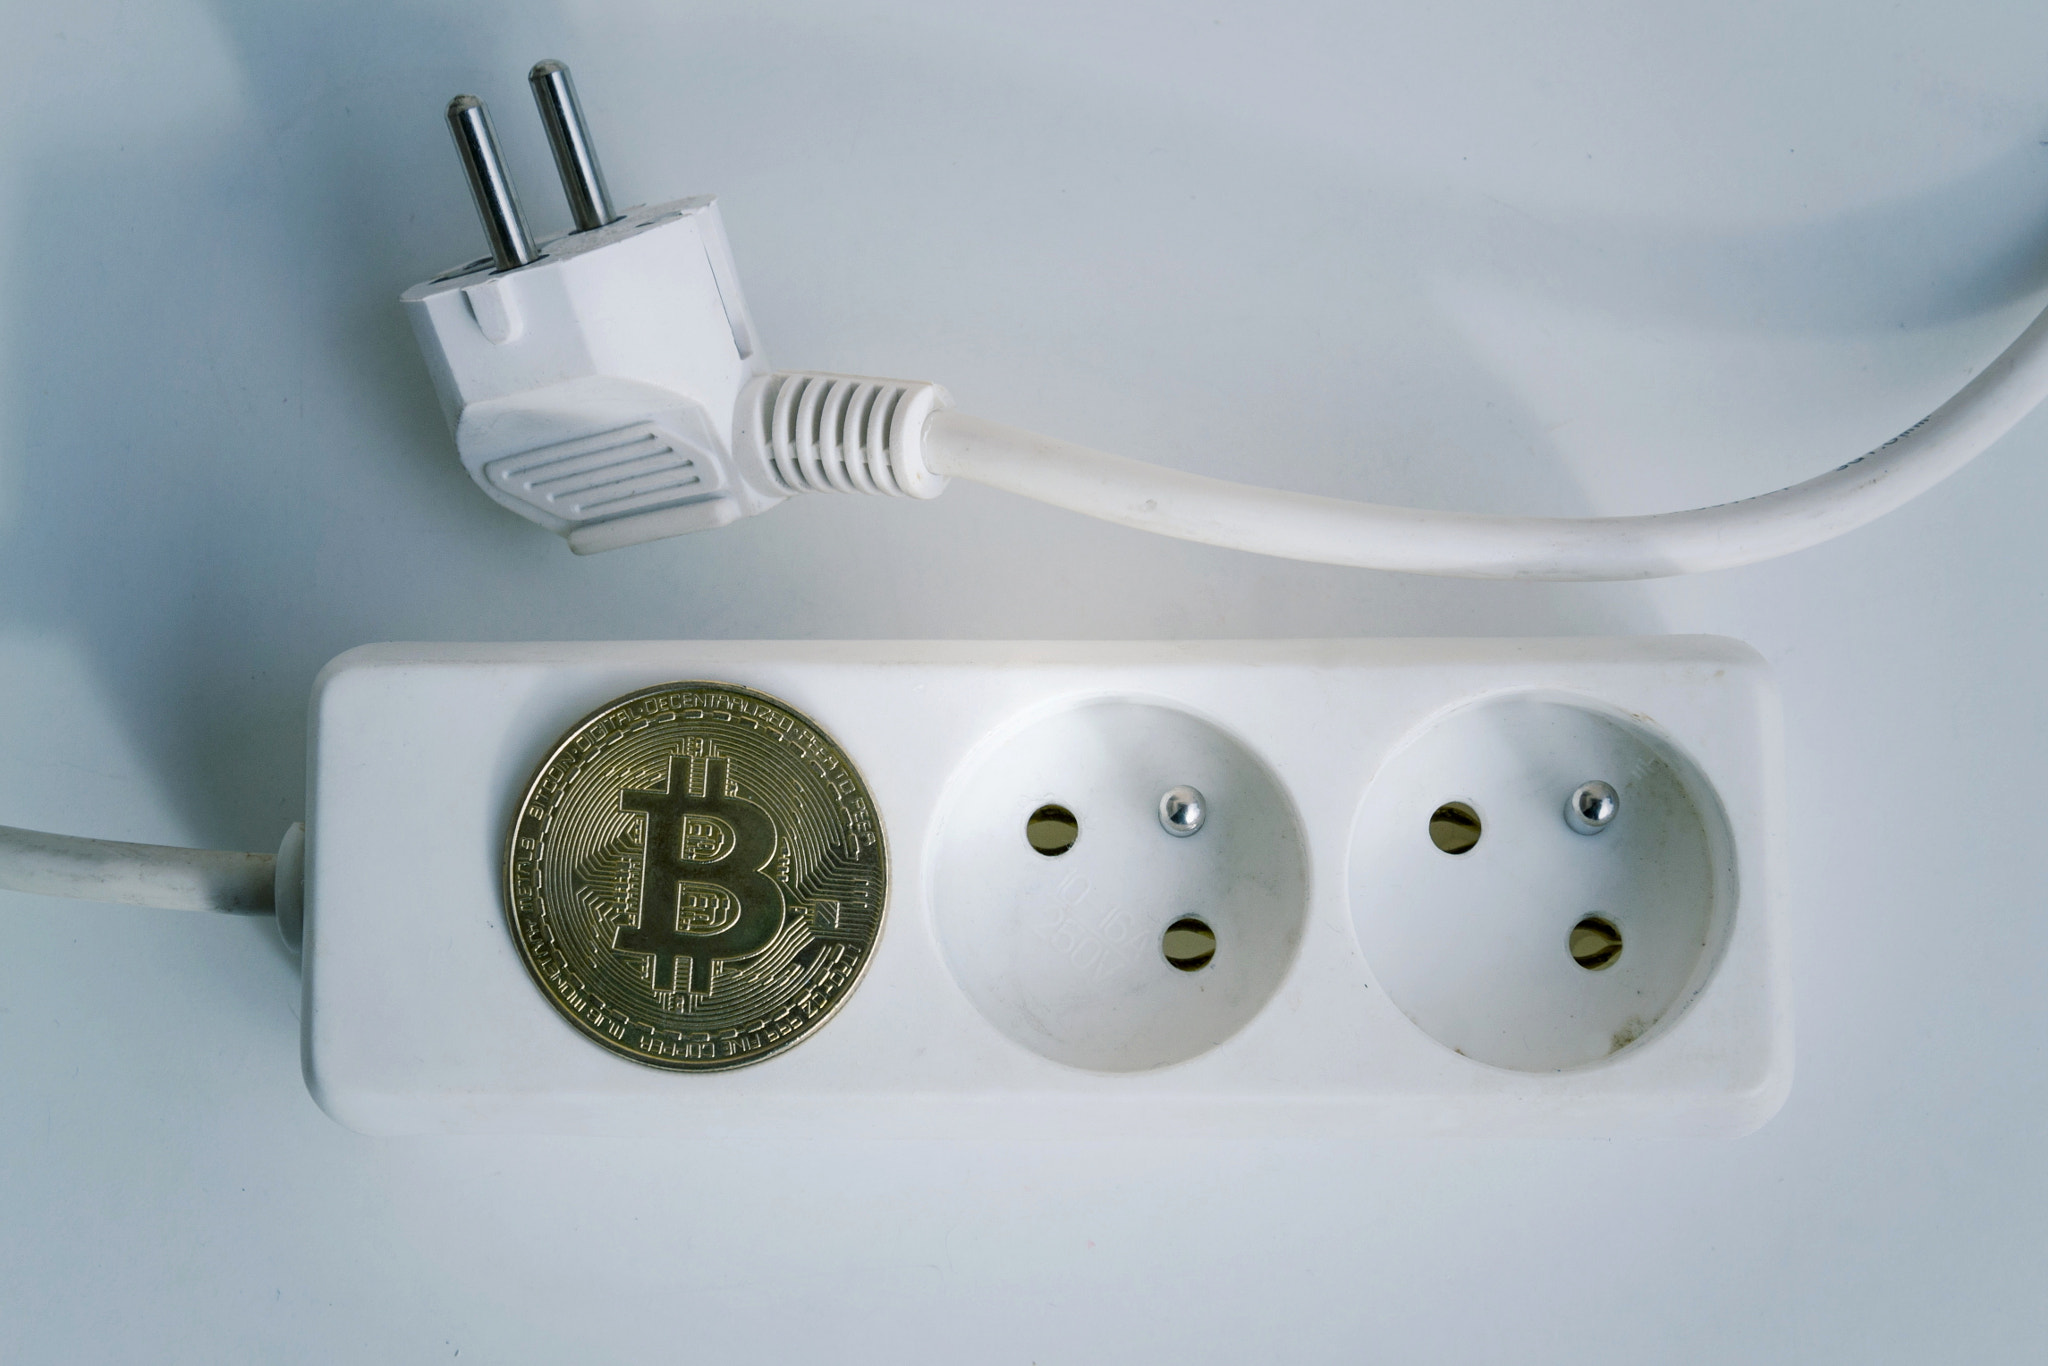 Bitcoin coin lying on power strip extension cord